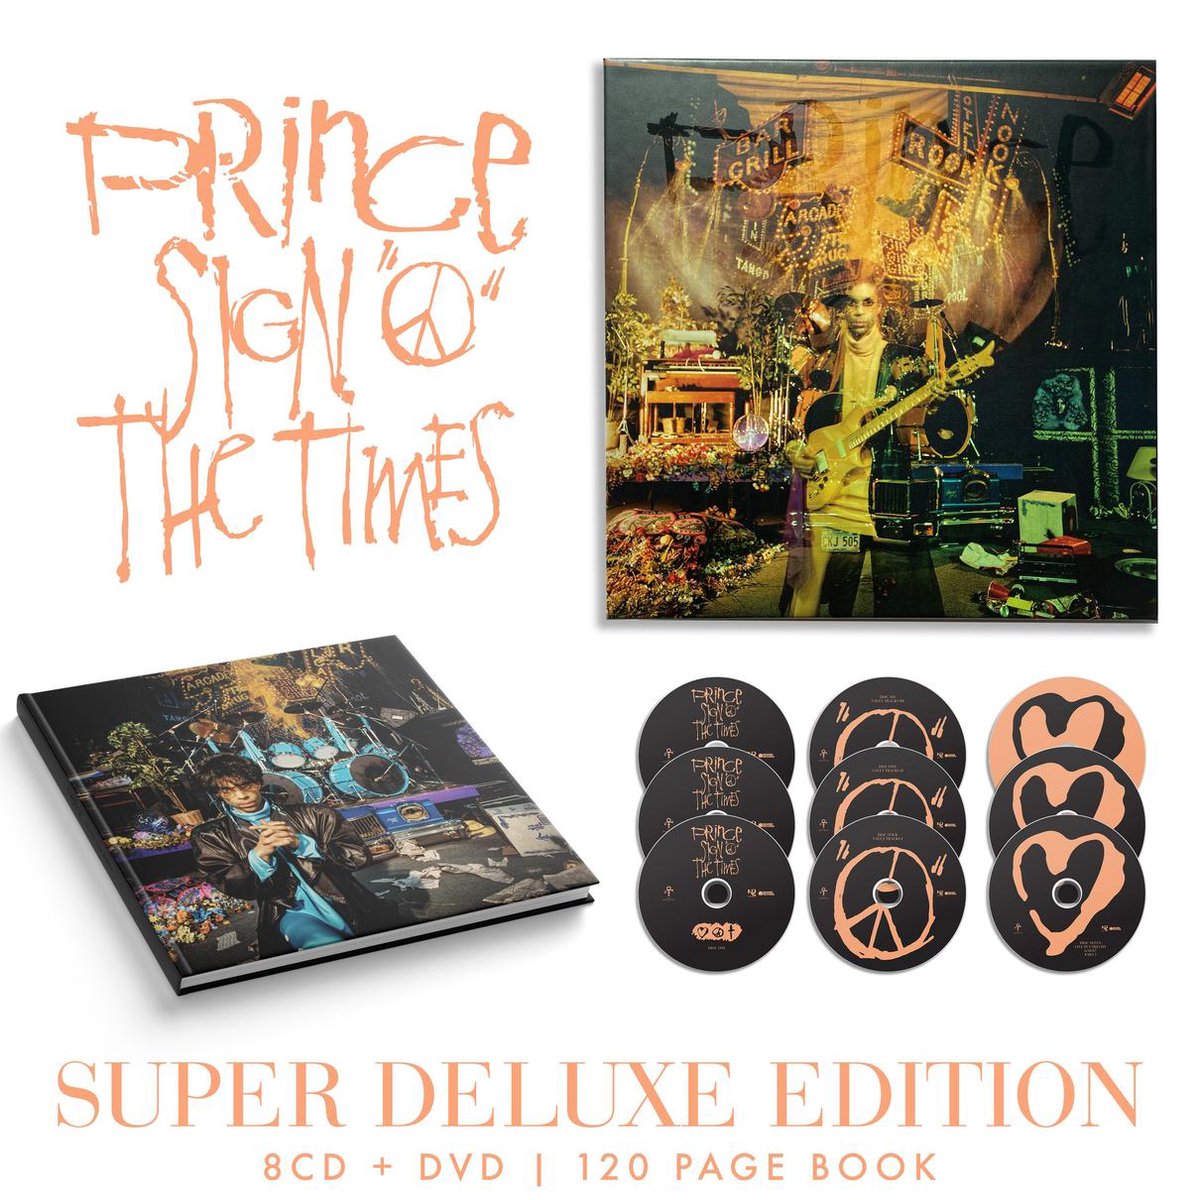 Prince Sign O' The Times (Super Deluxe Edition)